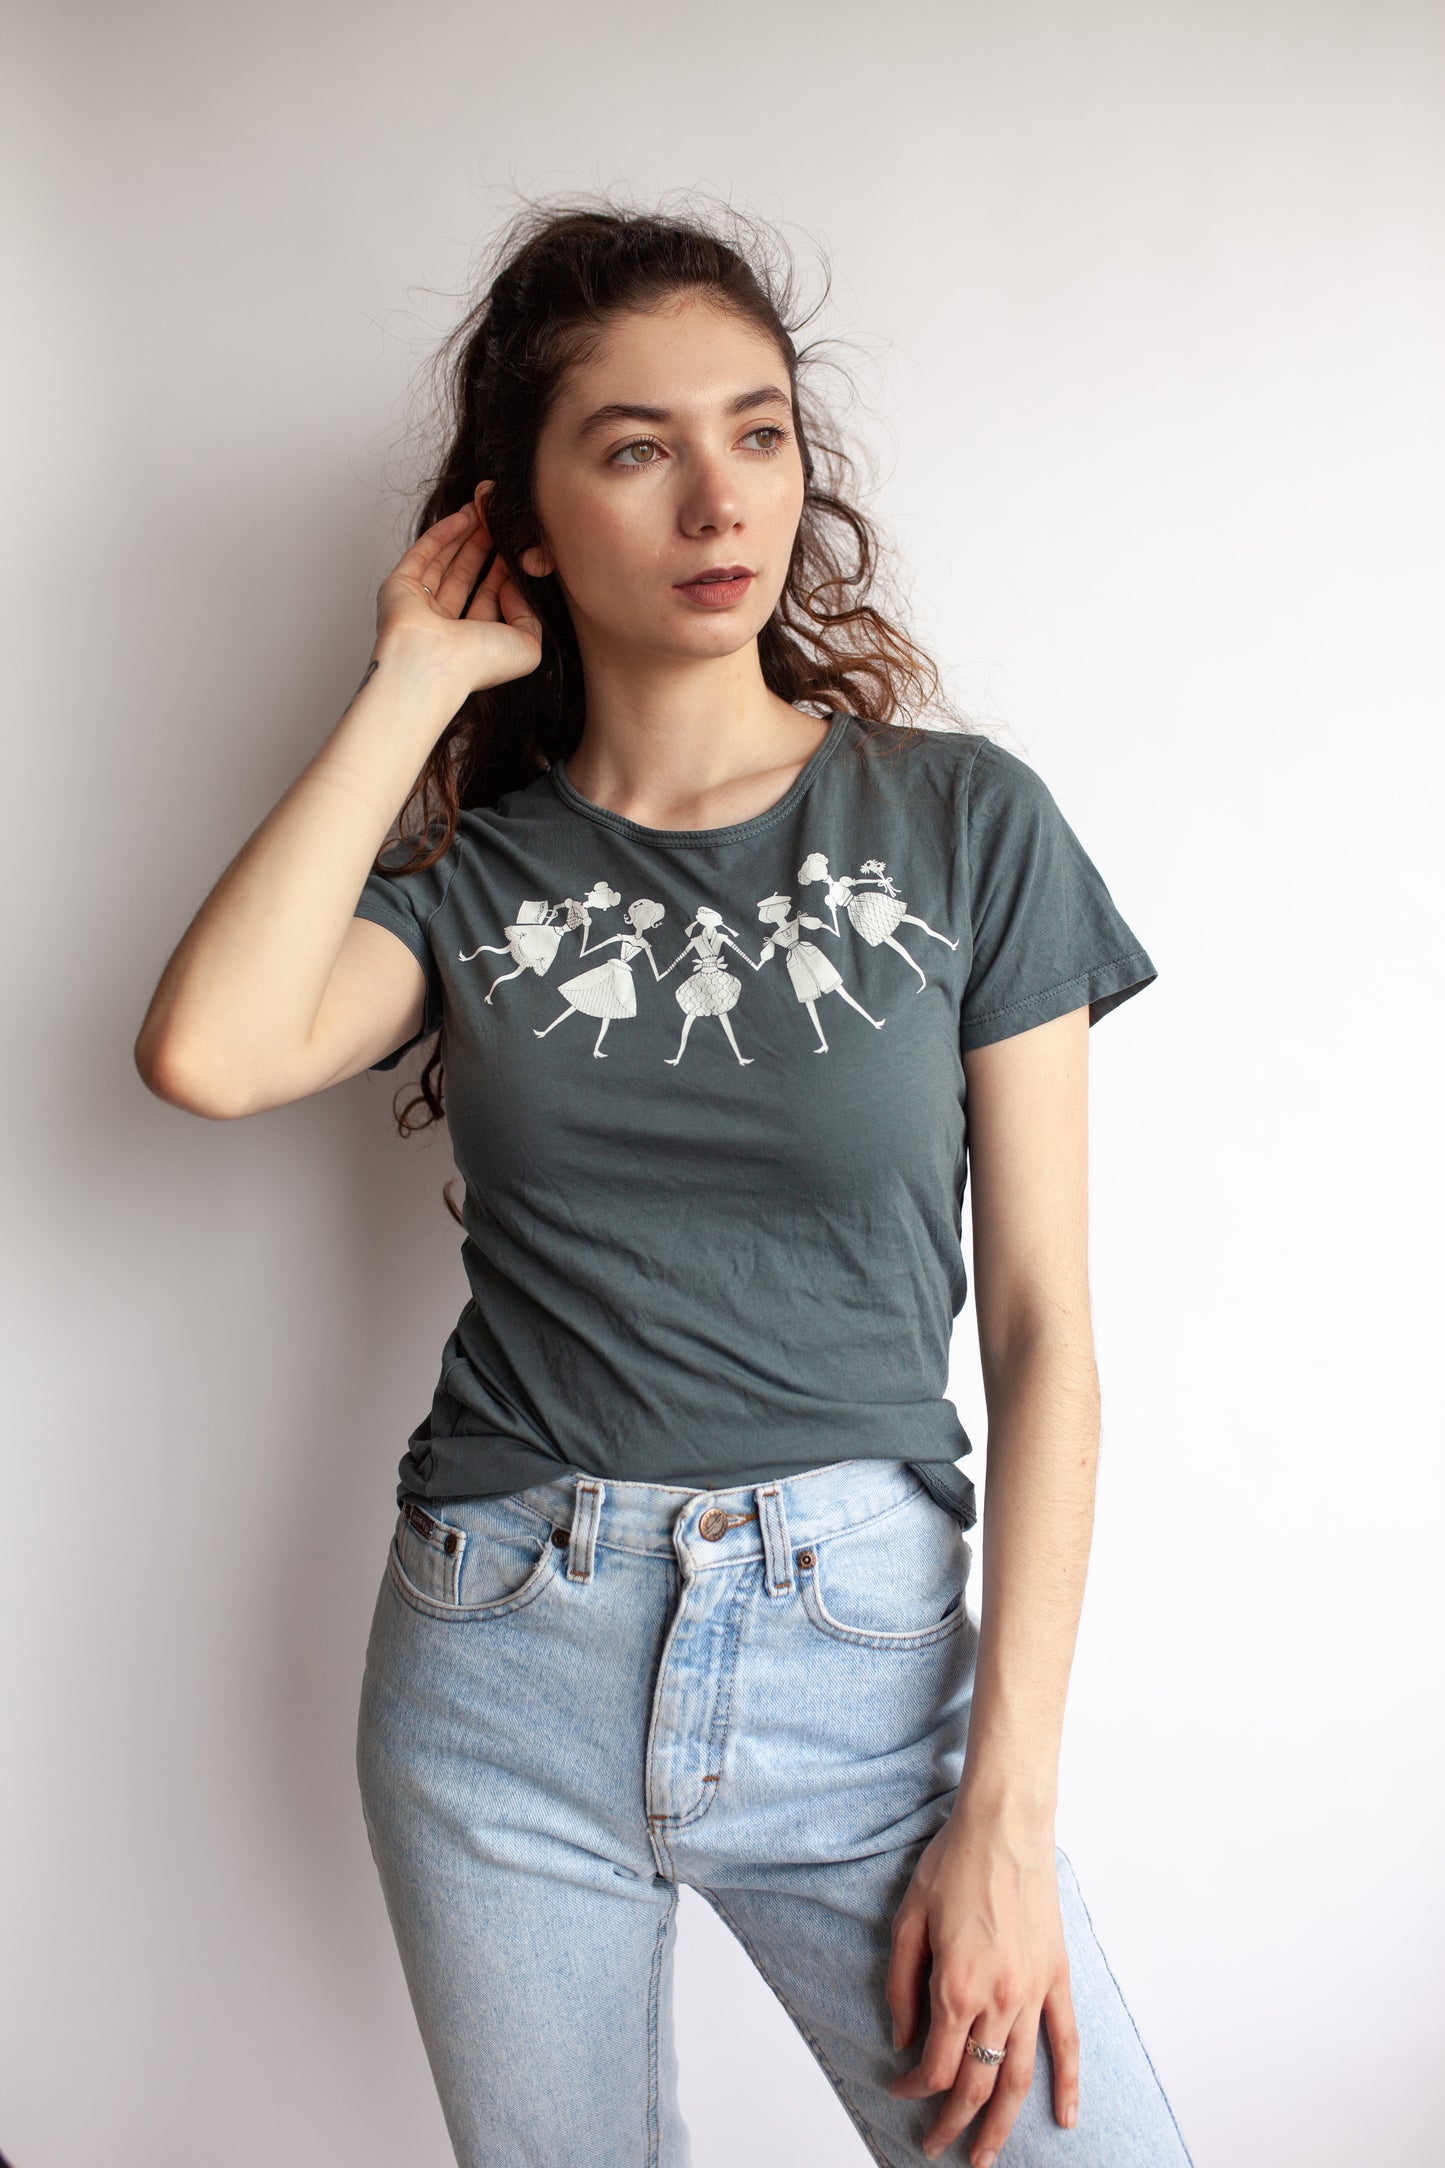 Model wearing cool grey tee featuring white paper dolls print 